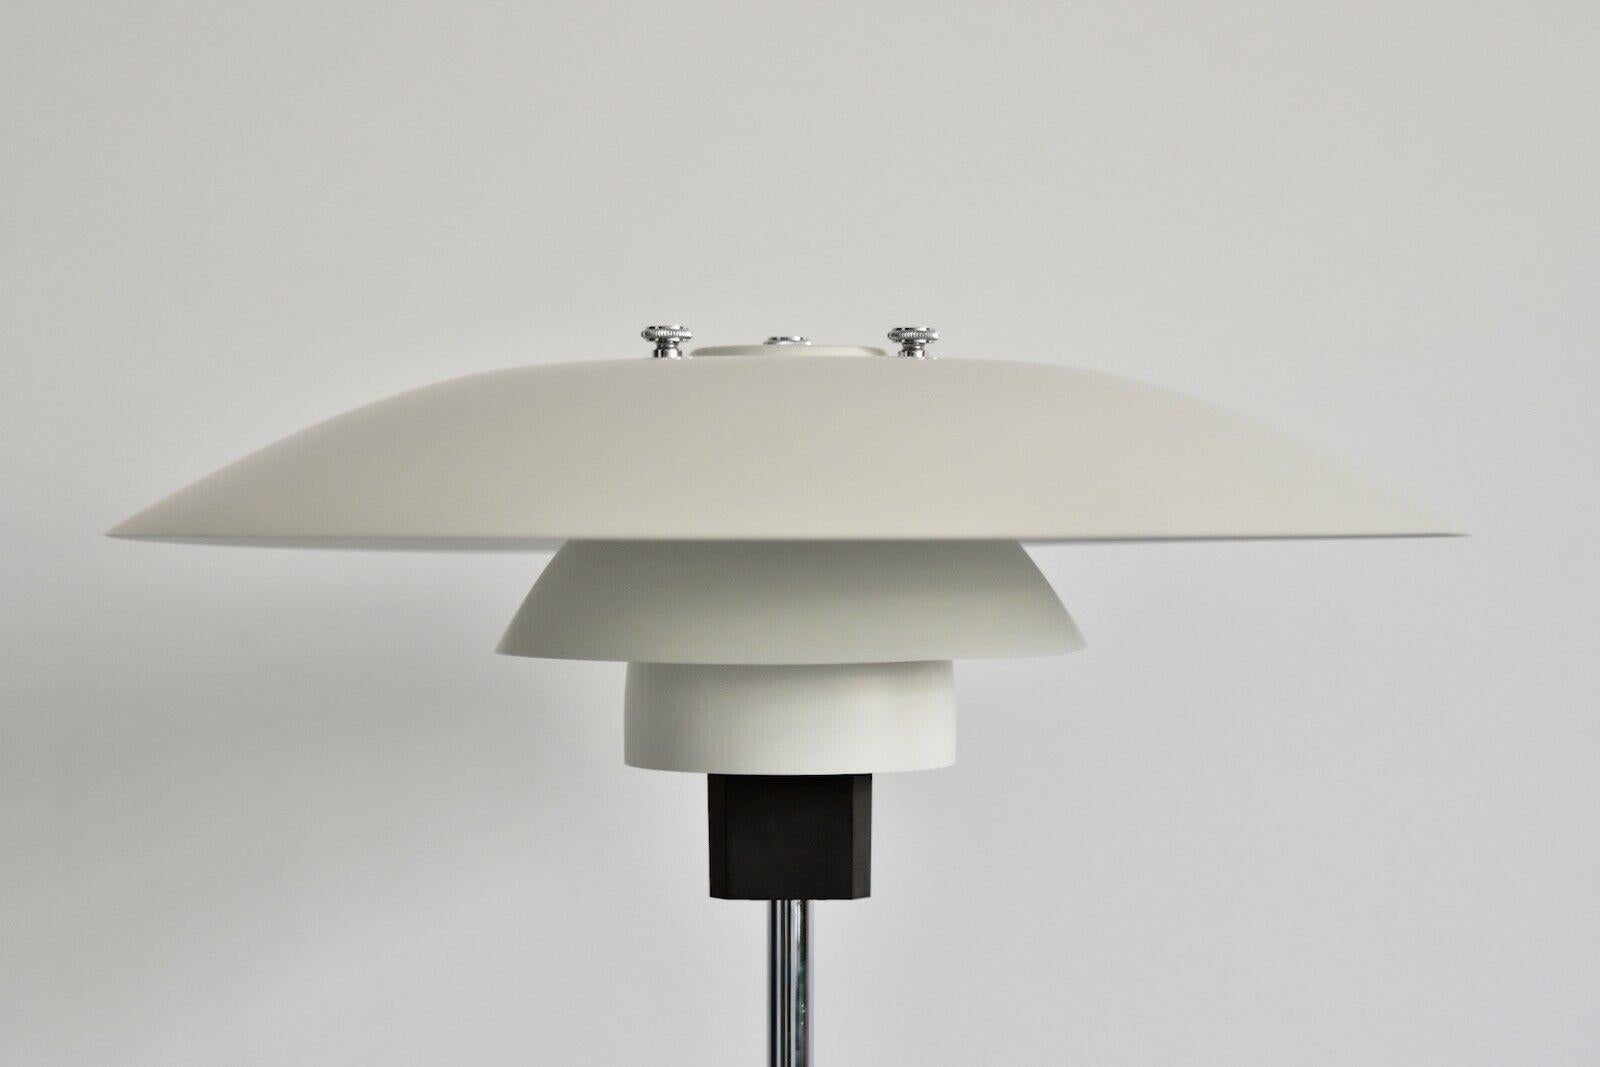 Very nice PH 4/3 table lamp from Poul Henningsen produced by Louis Poulsen, Made in Denmark. The lamp is in very good condition. No parts missing, small scratches. With E26/27 Edison socket ready to use worldwide.
     